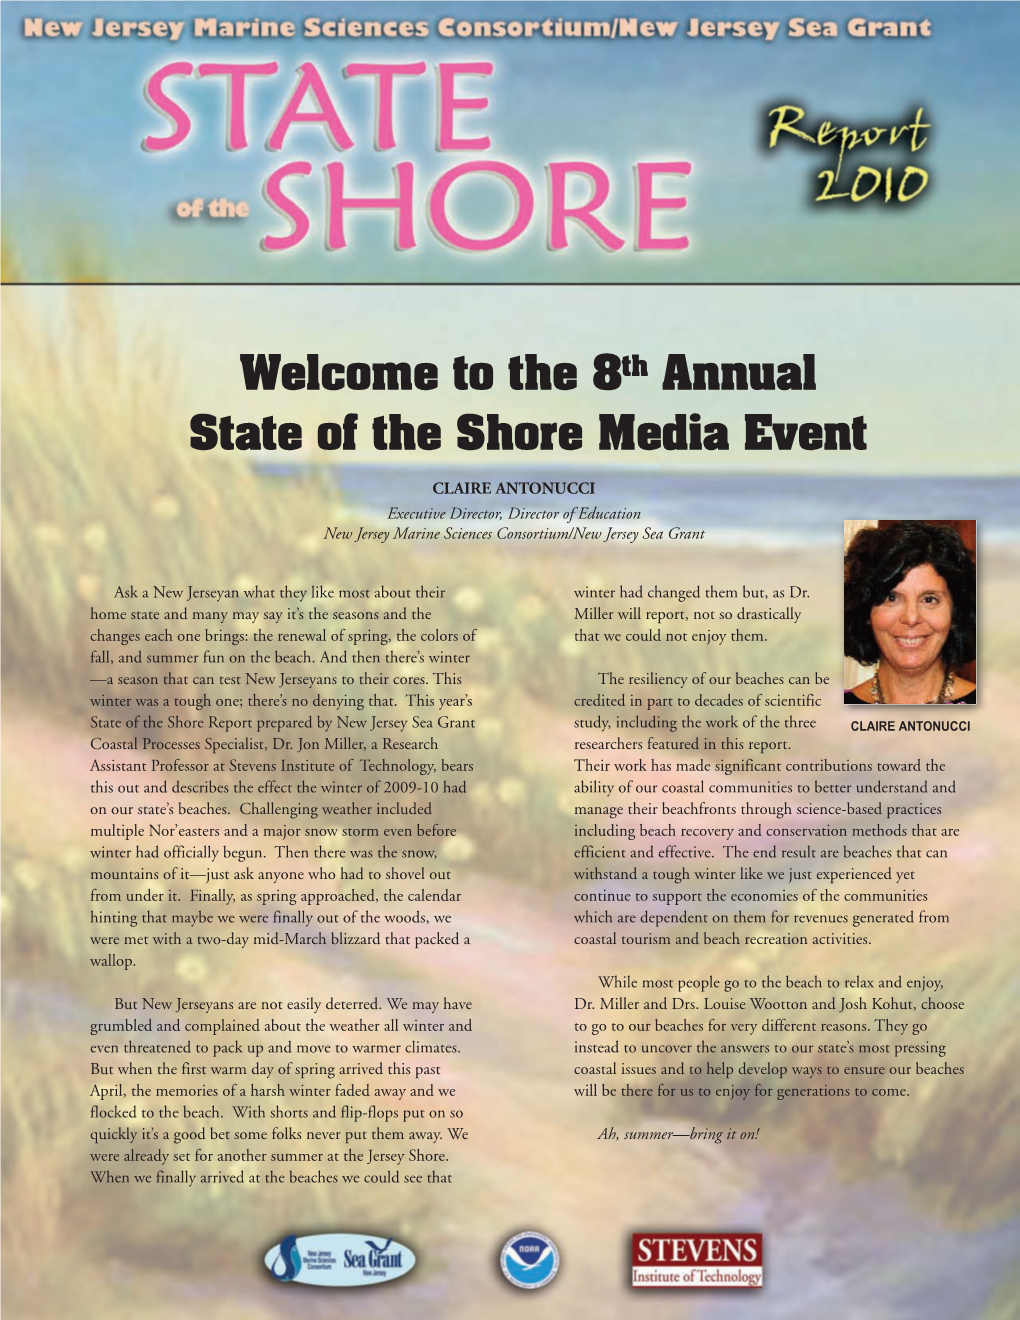 The 8Th Annual State of the Shore Media Event